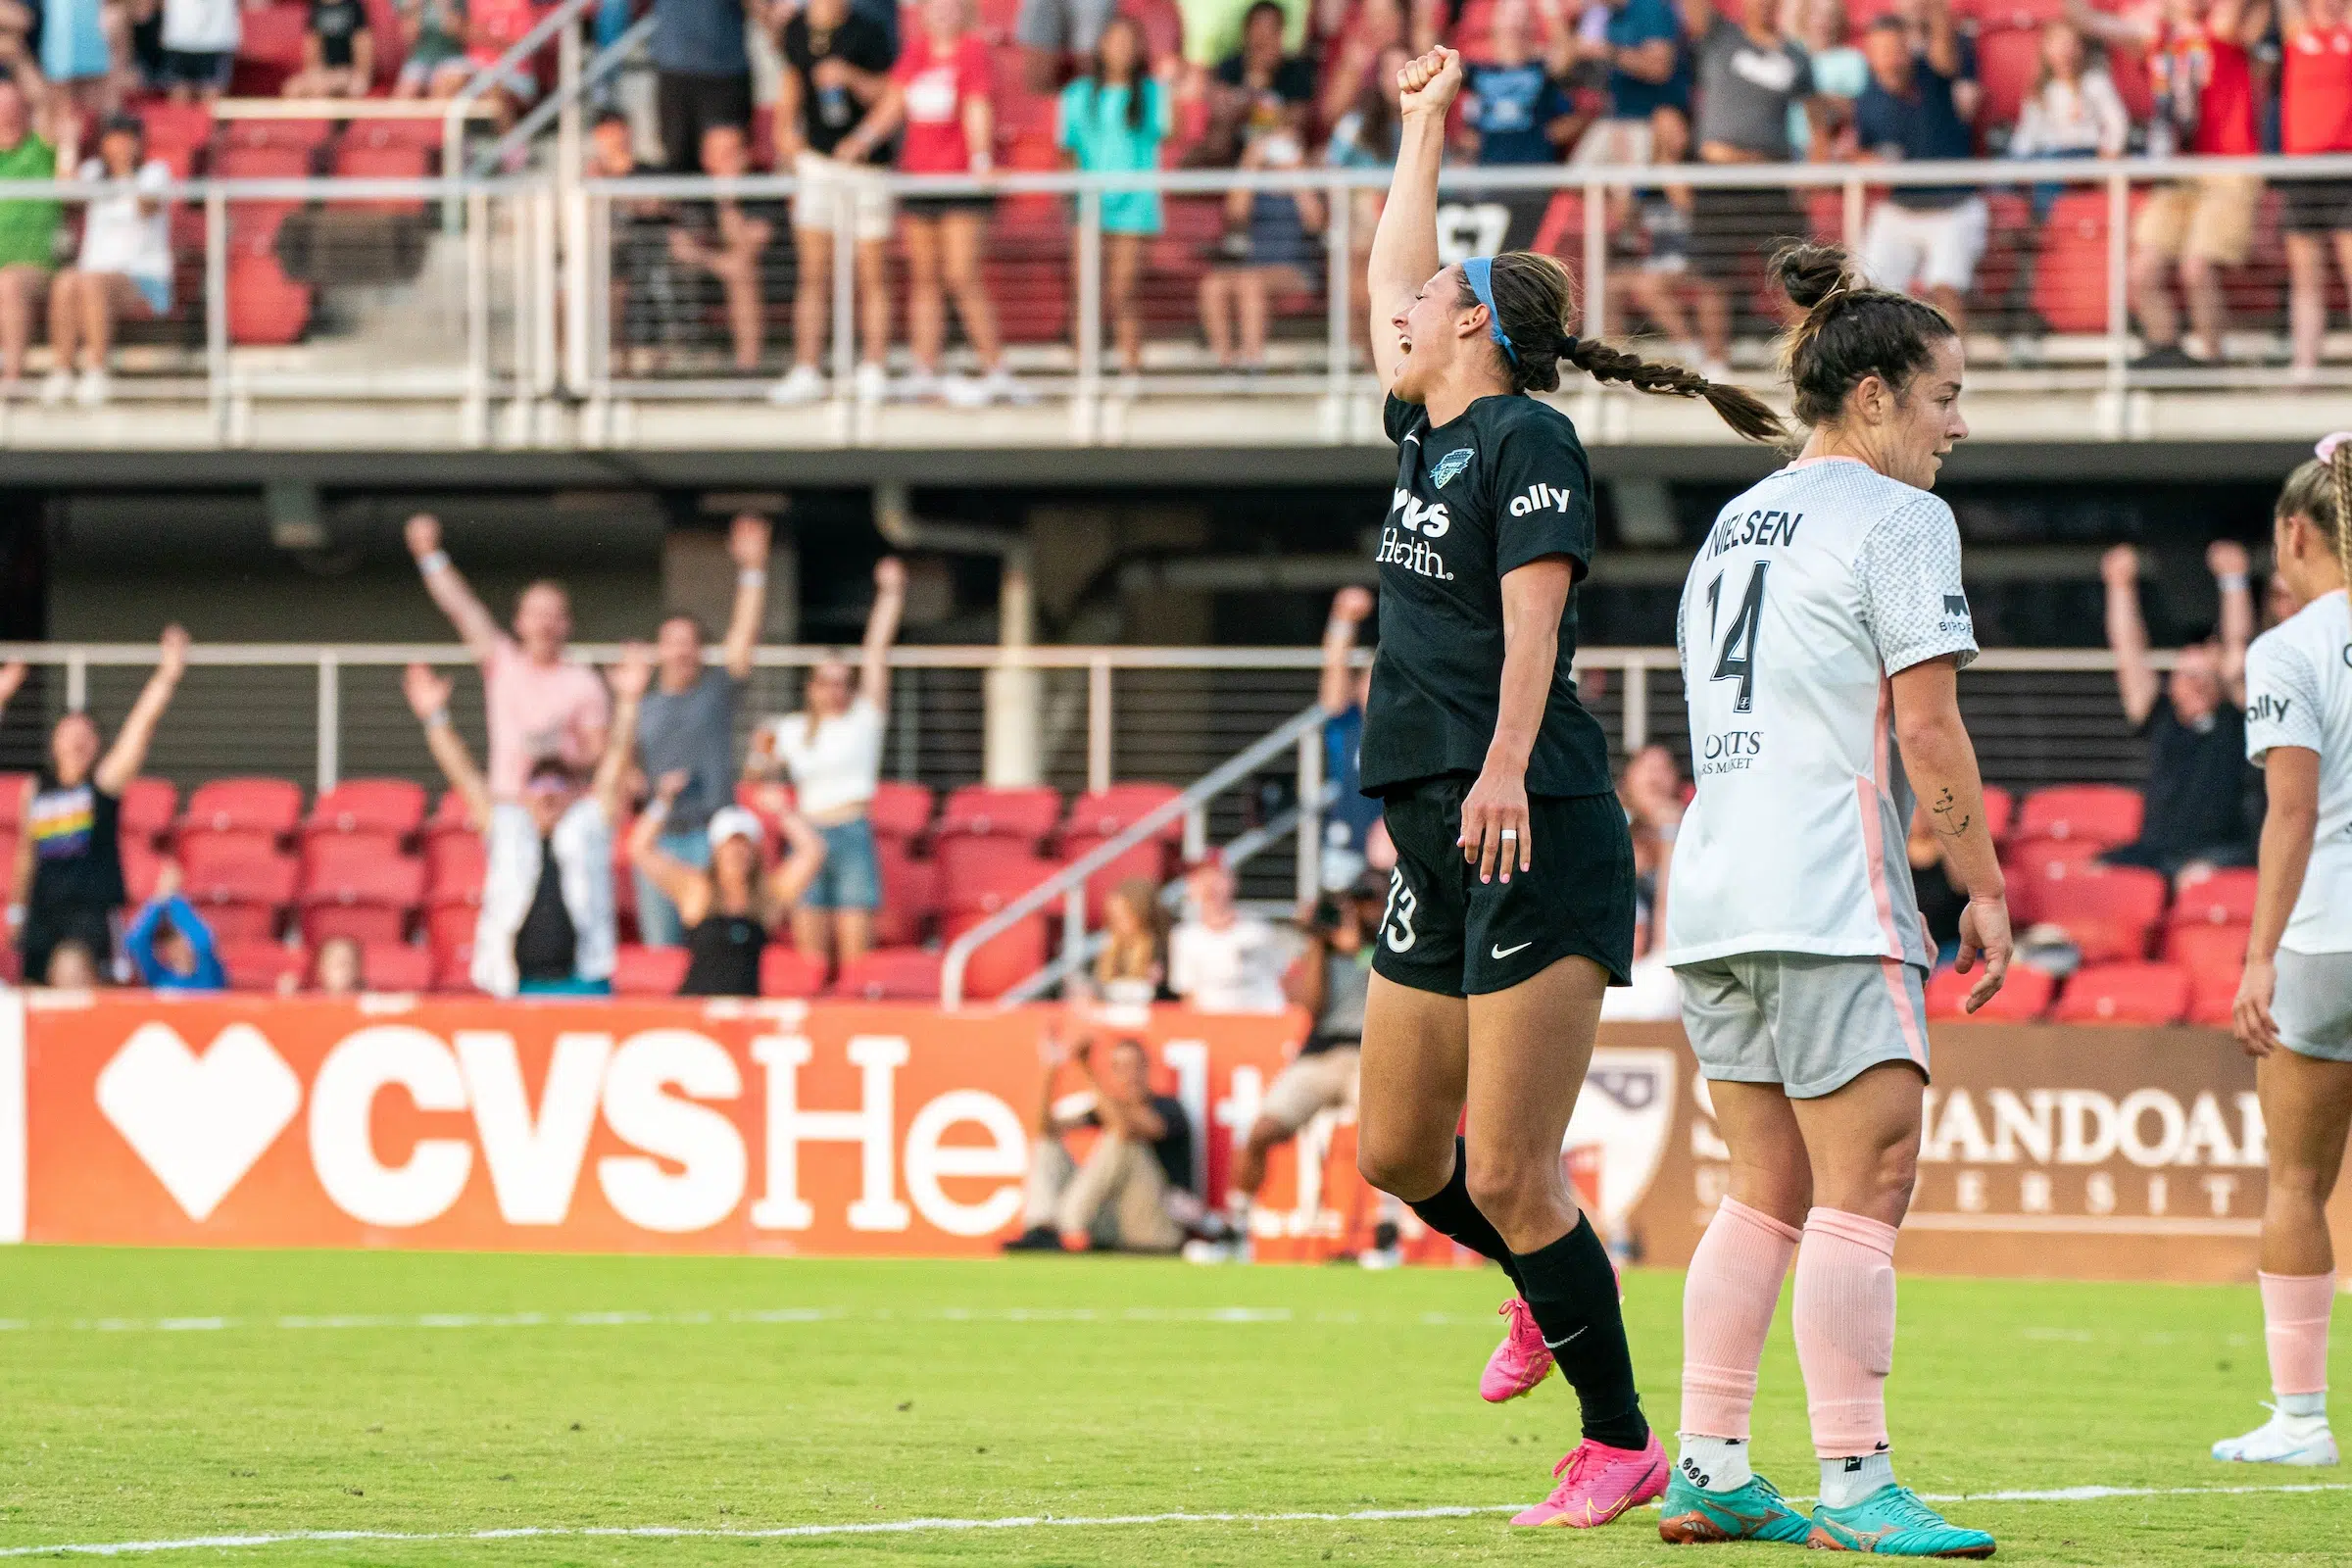 Ashley Hatch in a black uniform with pink cleats lifts her fist in celebratio as two defenders in gray uniforms look on in disappointment.